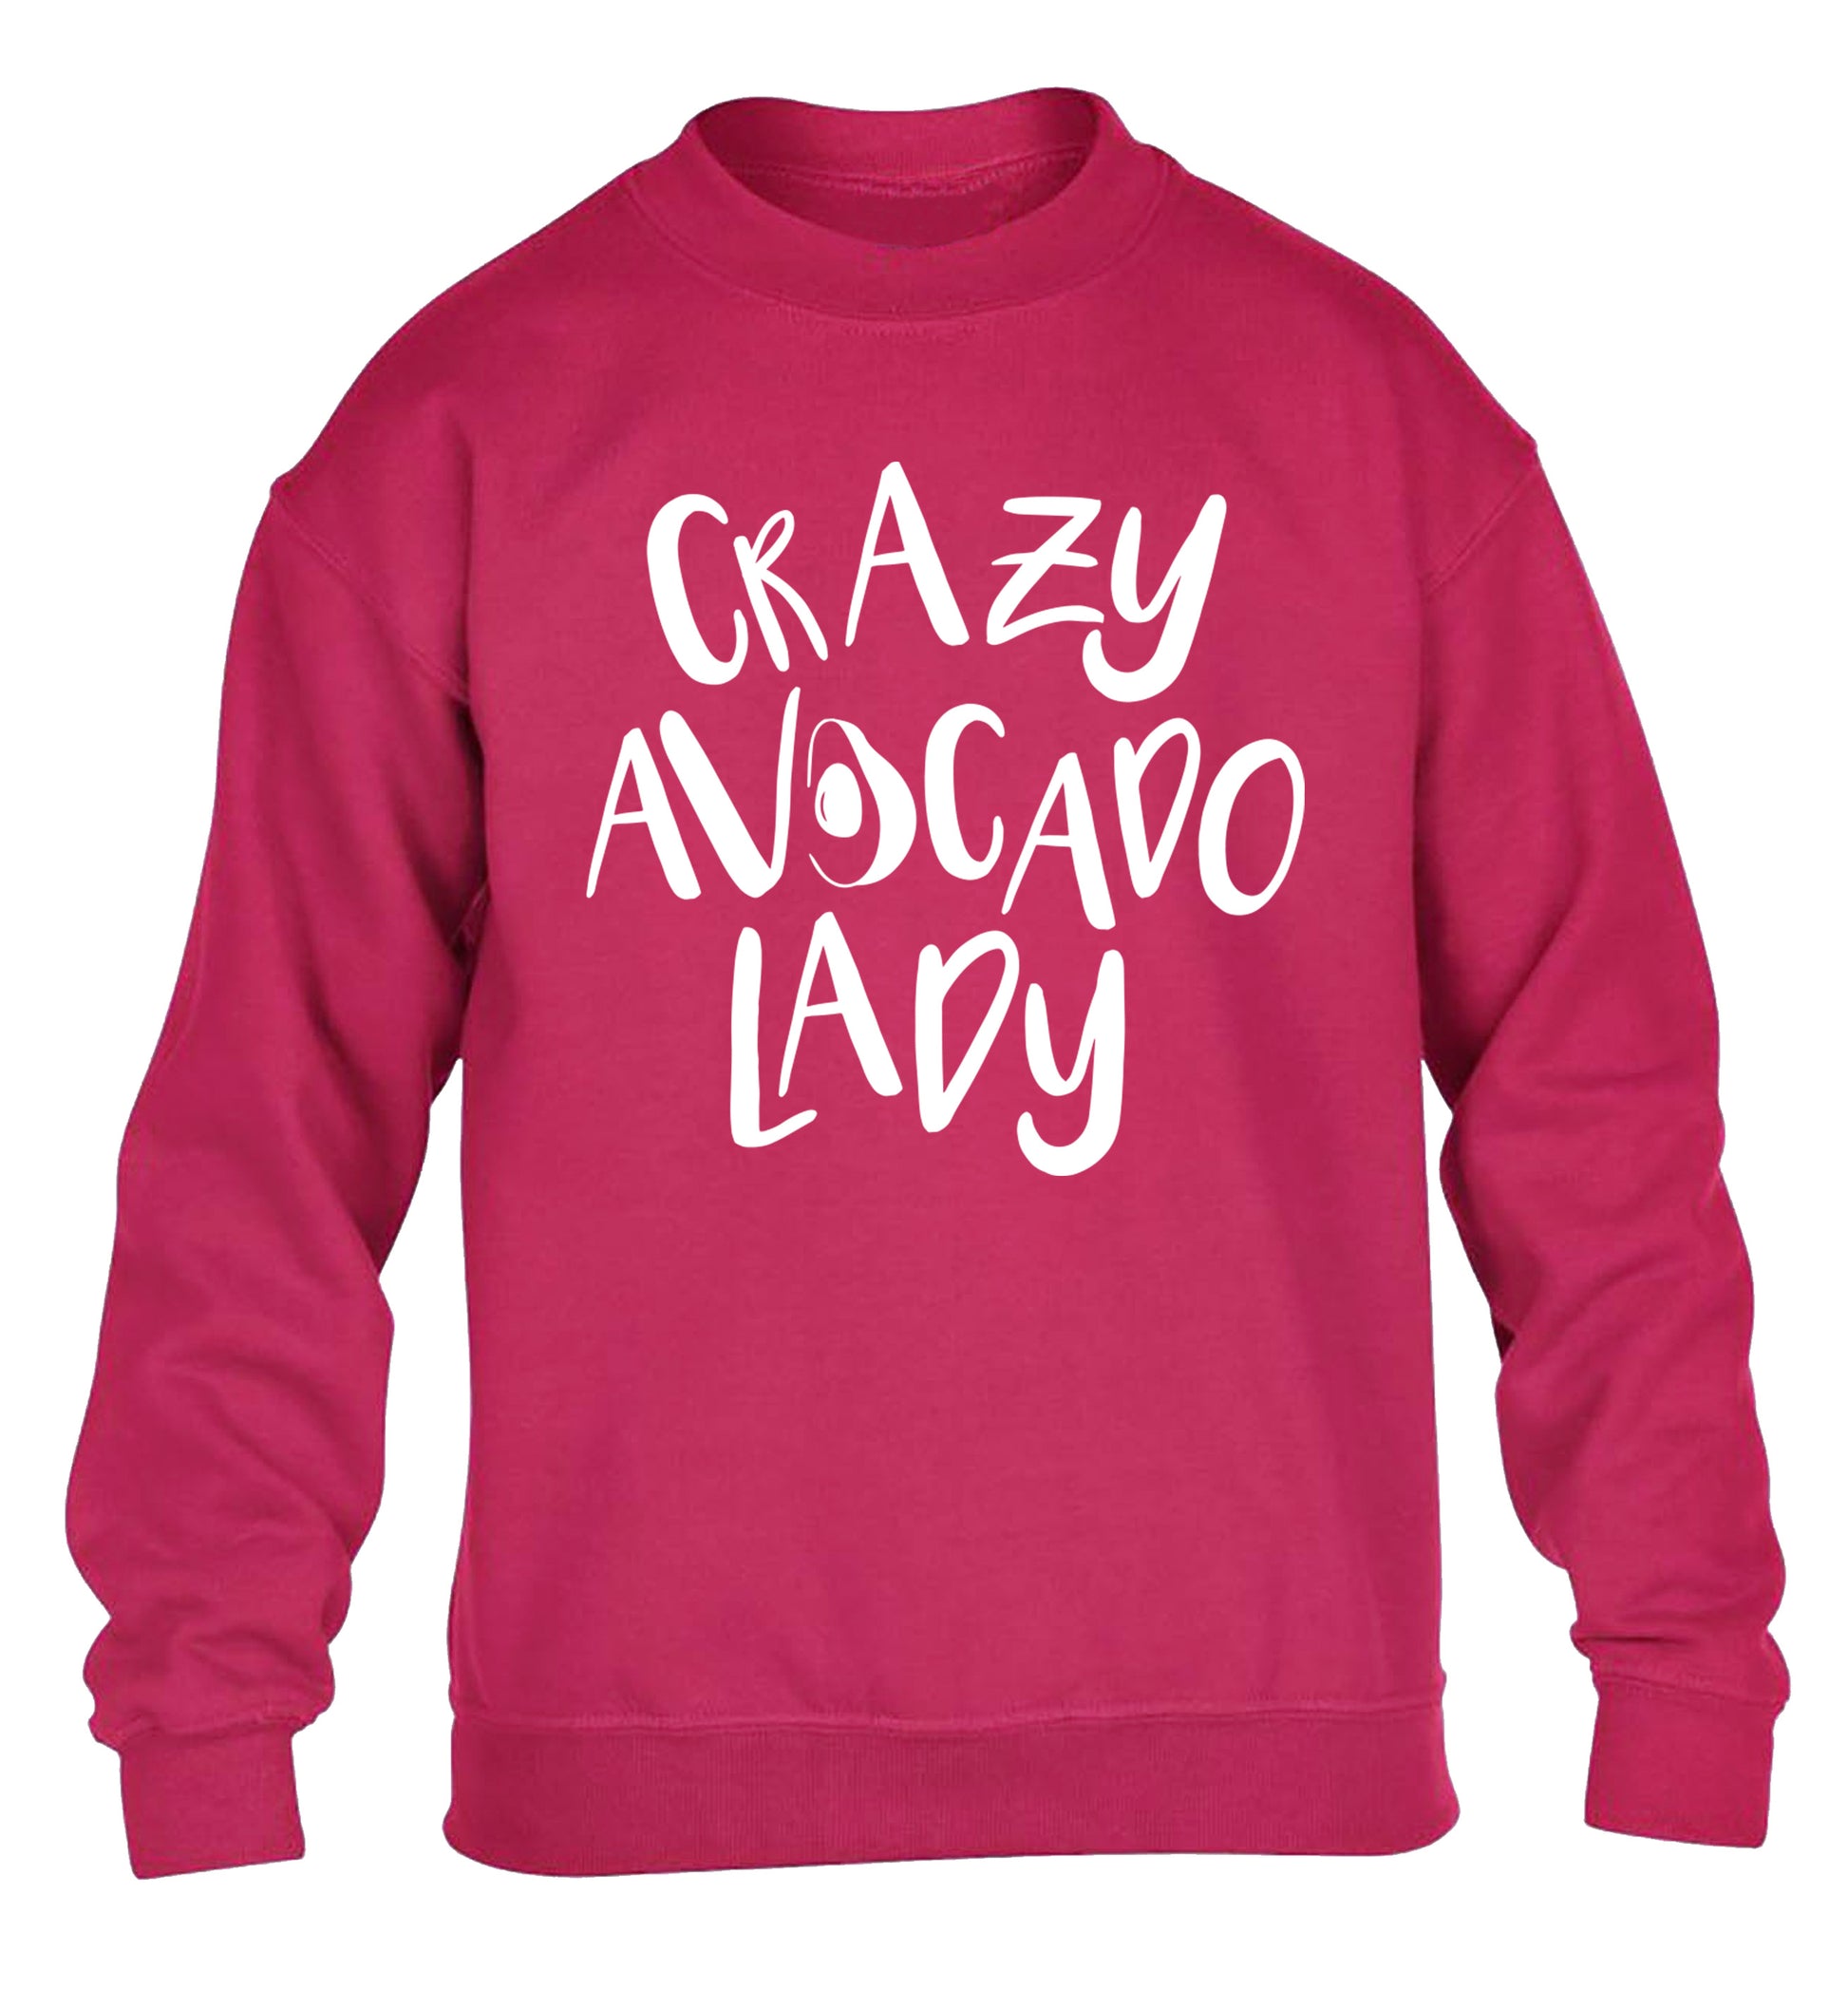 Crazy avocado lady children's pink sweater 12-14 Years